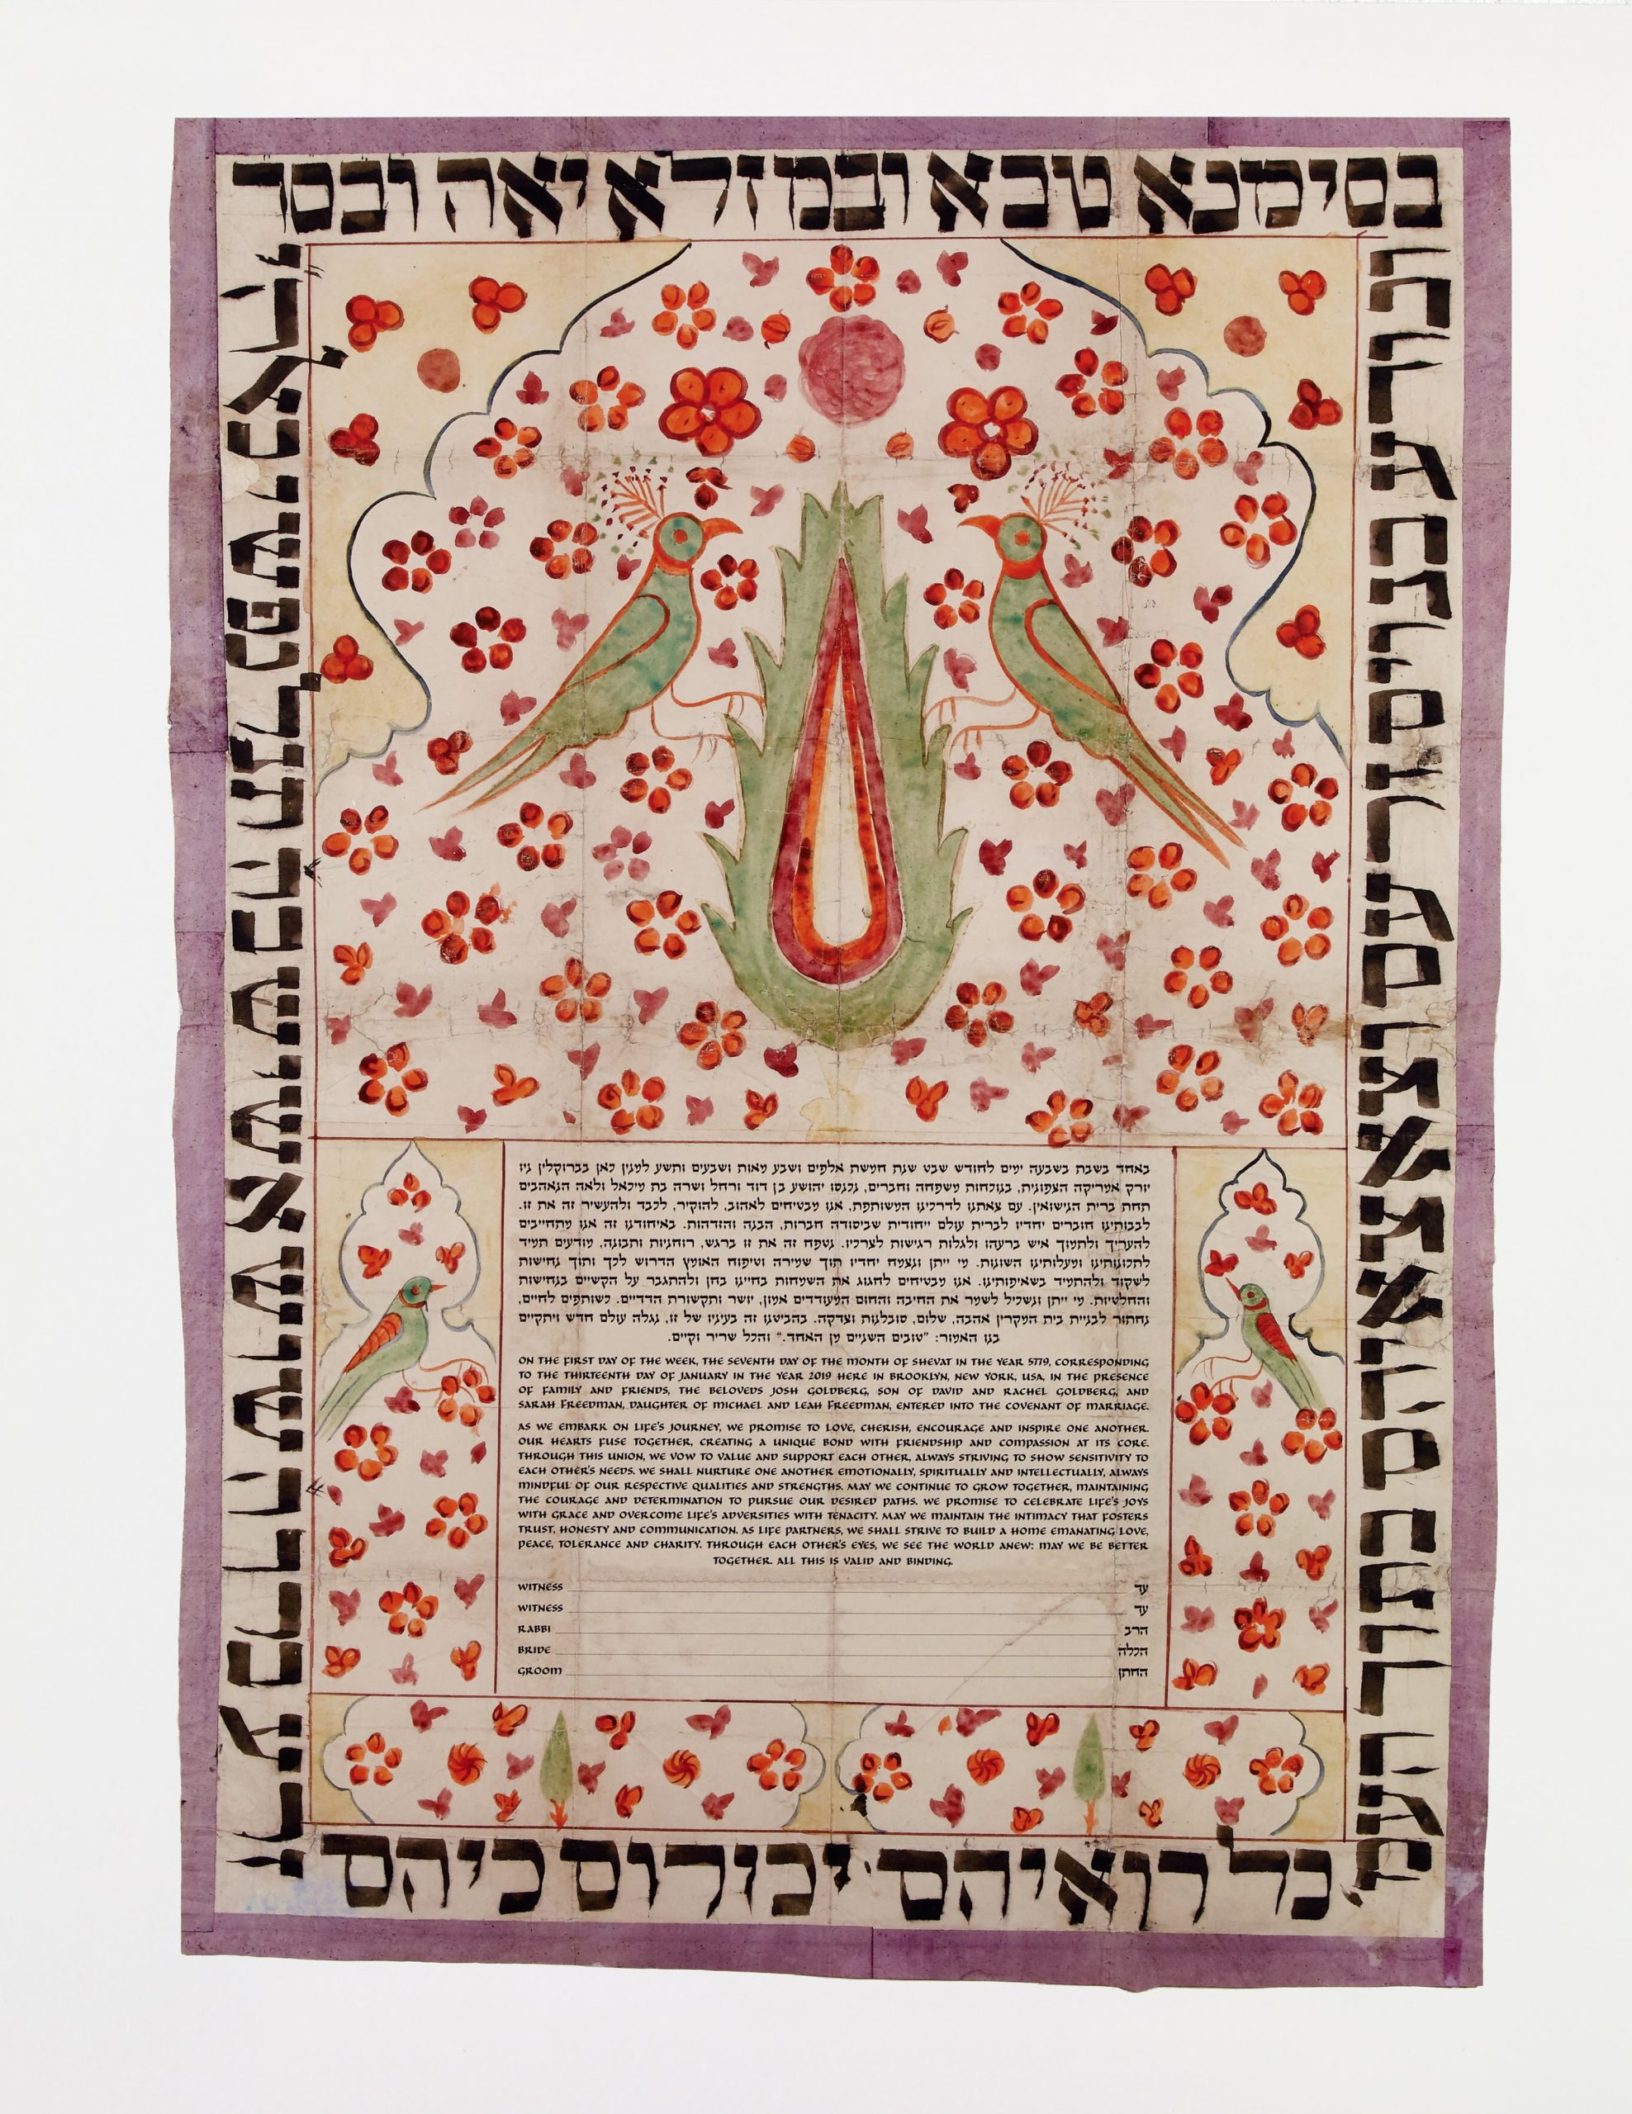 Isfahan, Persia, 1879 Ketubah Toronto by The Jewish Museum